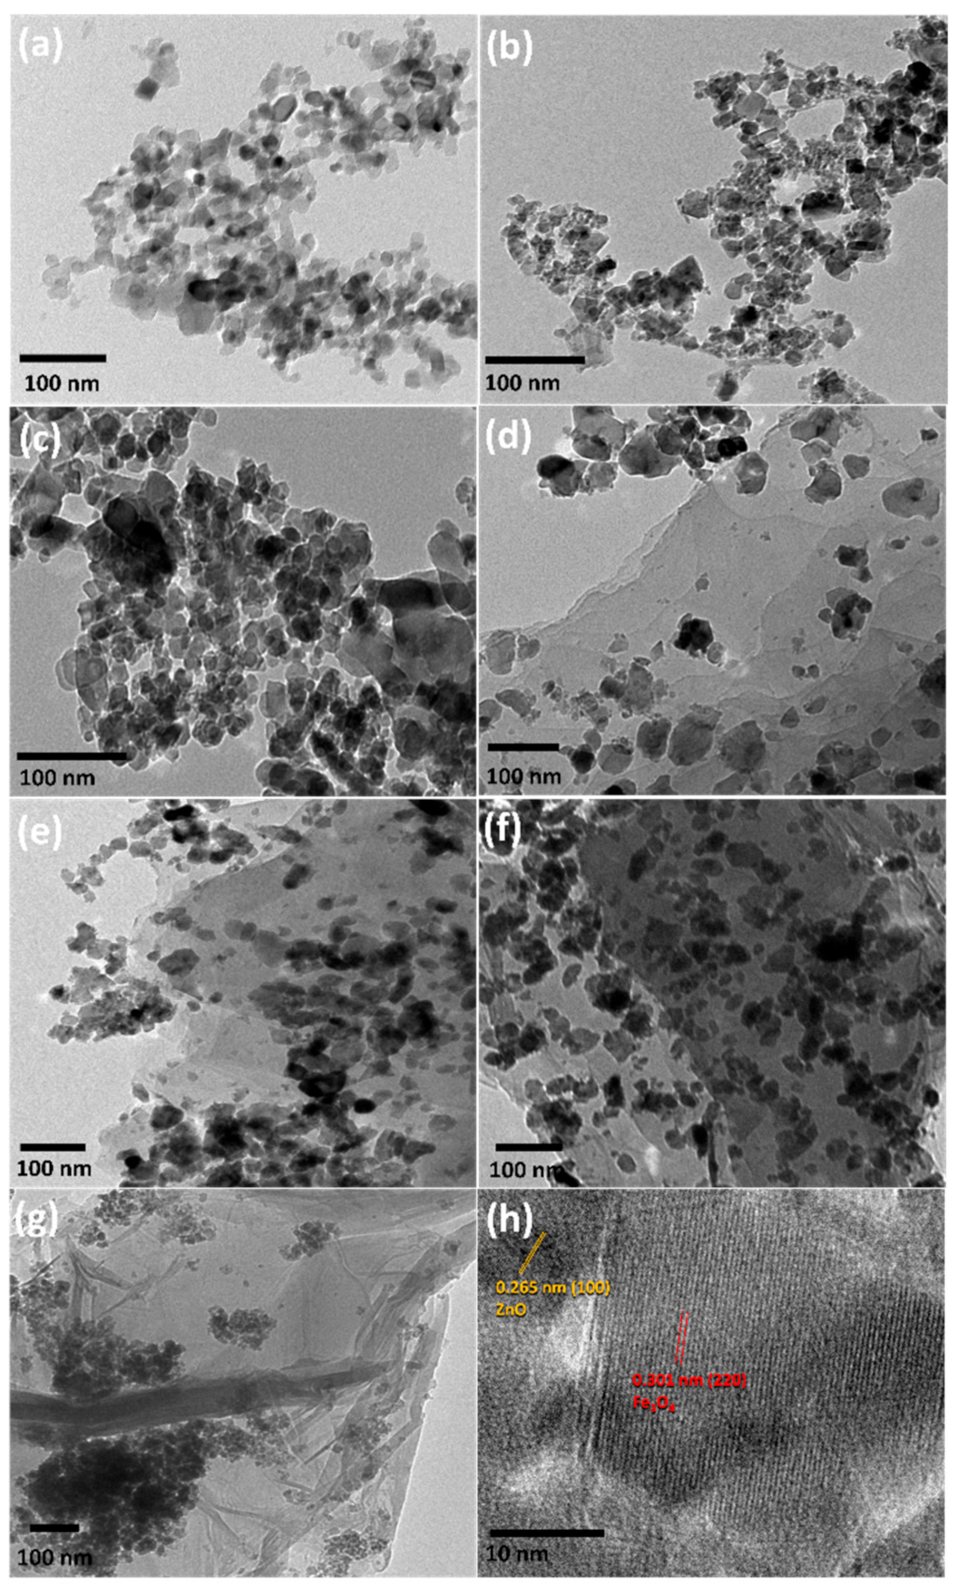 Molecules Free Full Text Magnetic Zno Crystal Nanoparticle Growth On Reduced Graphene Oxide For Enhanced Photocatalytic Performance Under Visible Light Irradiation Html